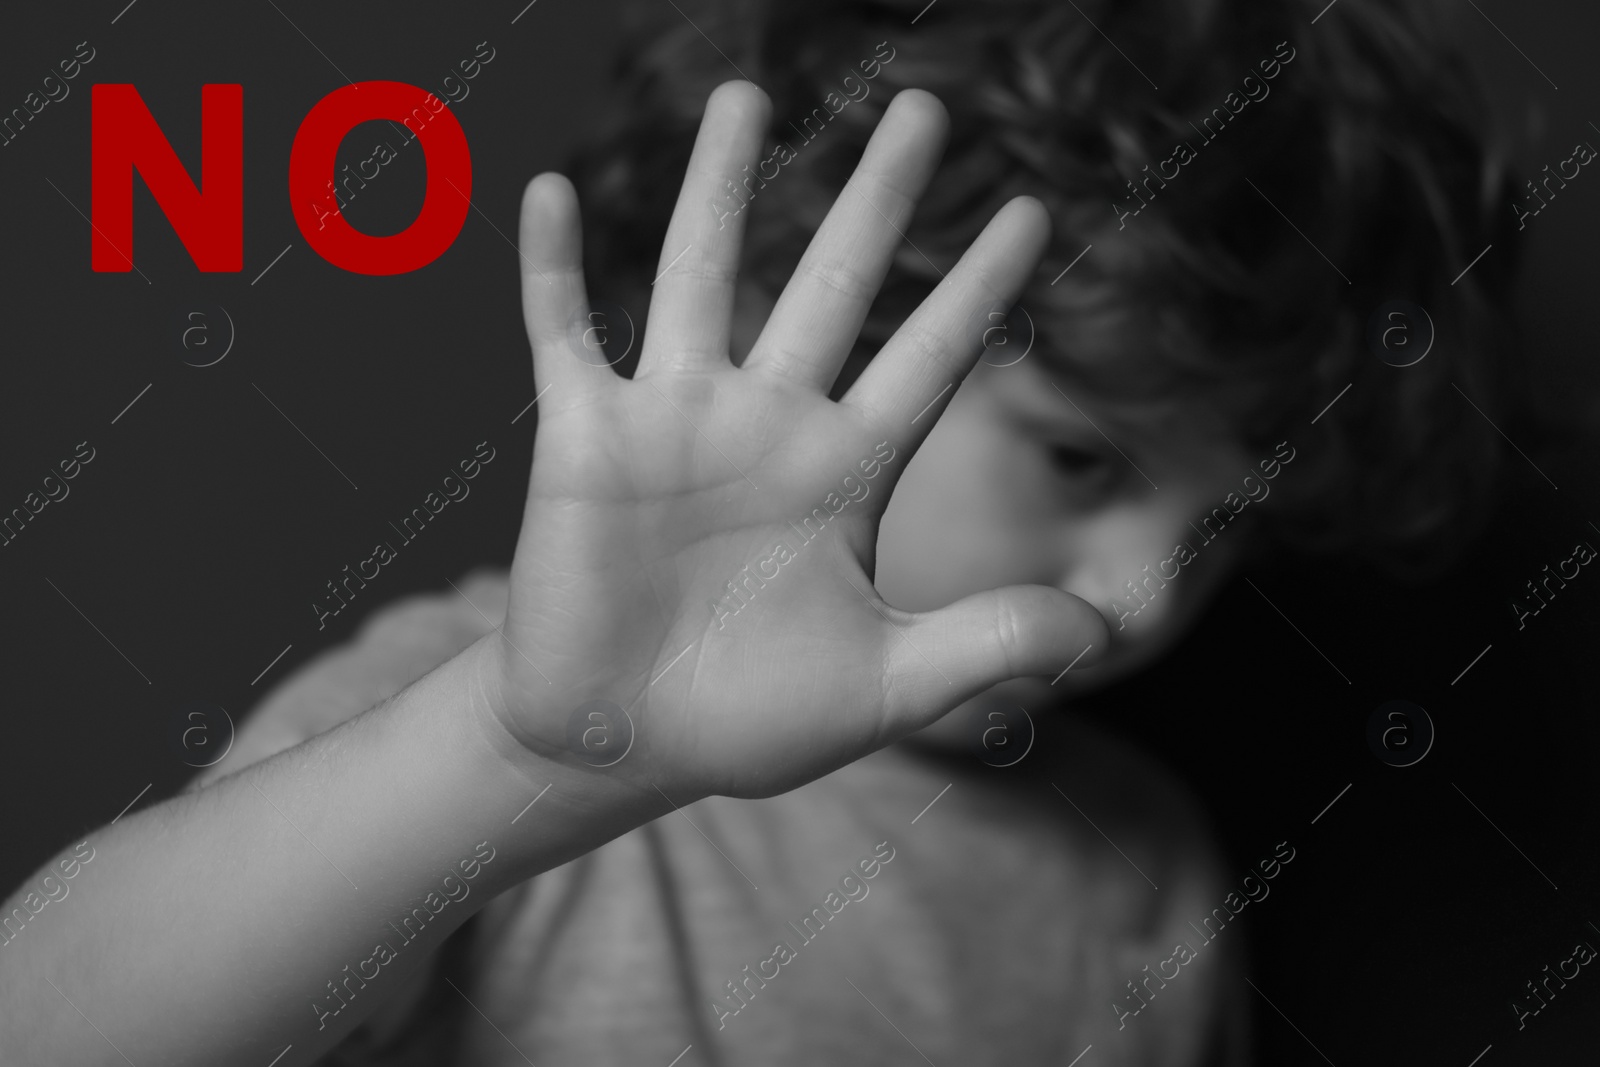 Image of No child abuse. Boy making stop gesture near dark wall, selective focus. Black and white effect